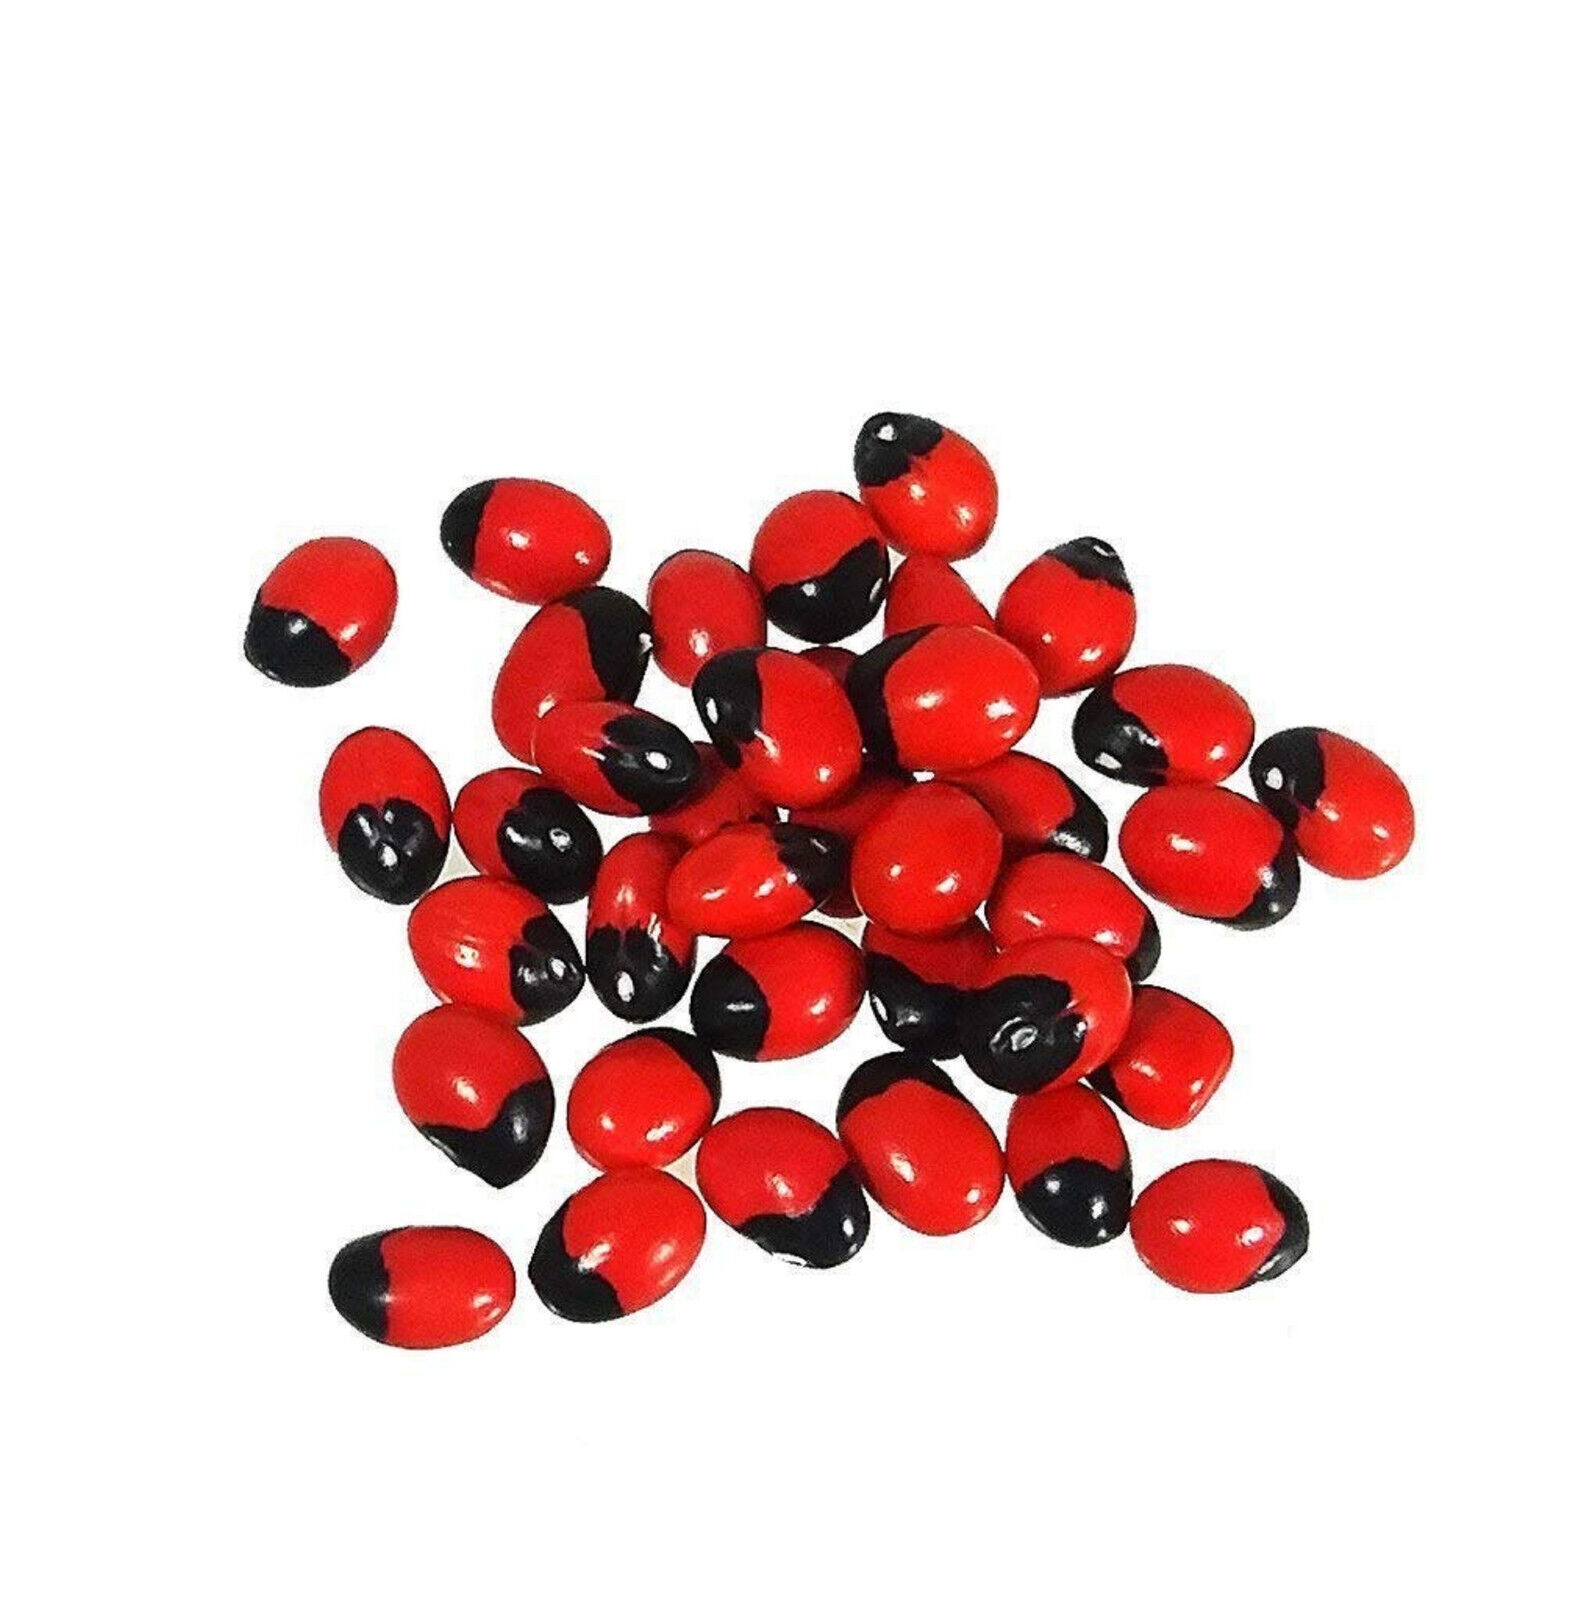 Indian traditional Original Chirmi Seeds color Red for puja pack of 51 pcs